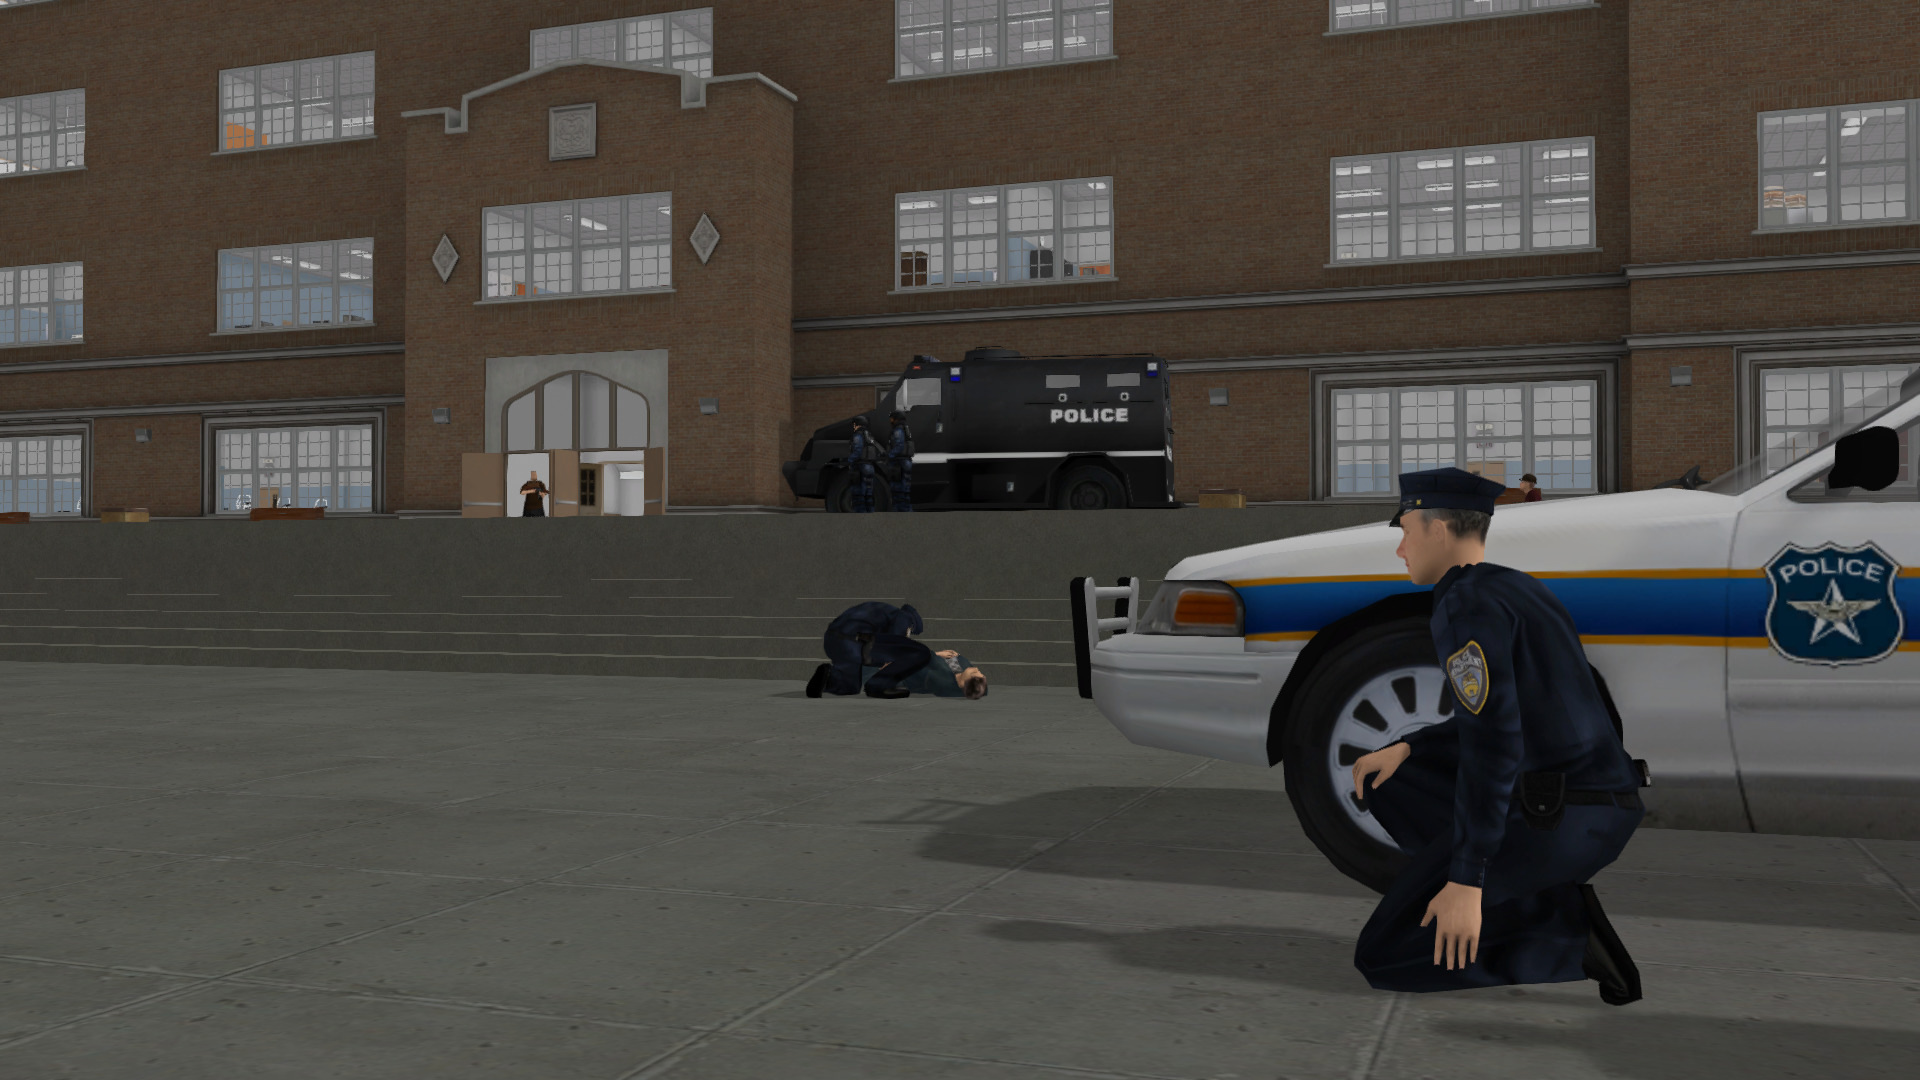 Police officers taking cover from an active shooter at a school, trained in a safe and repeatable simulated environment.